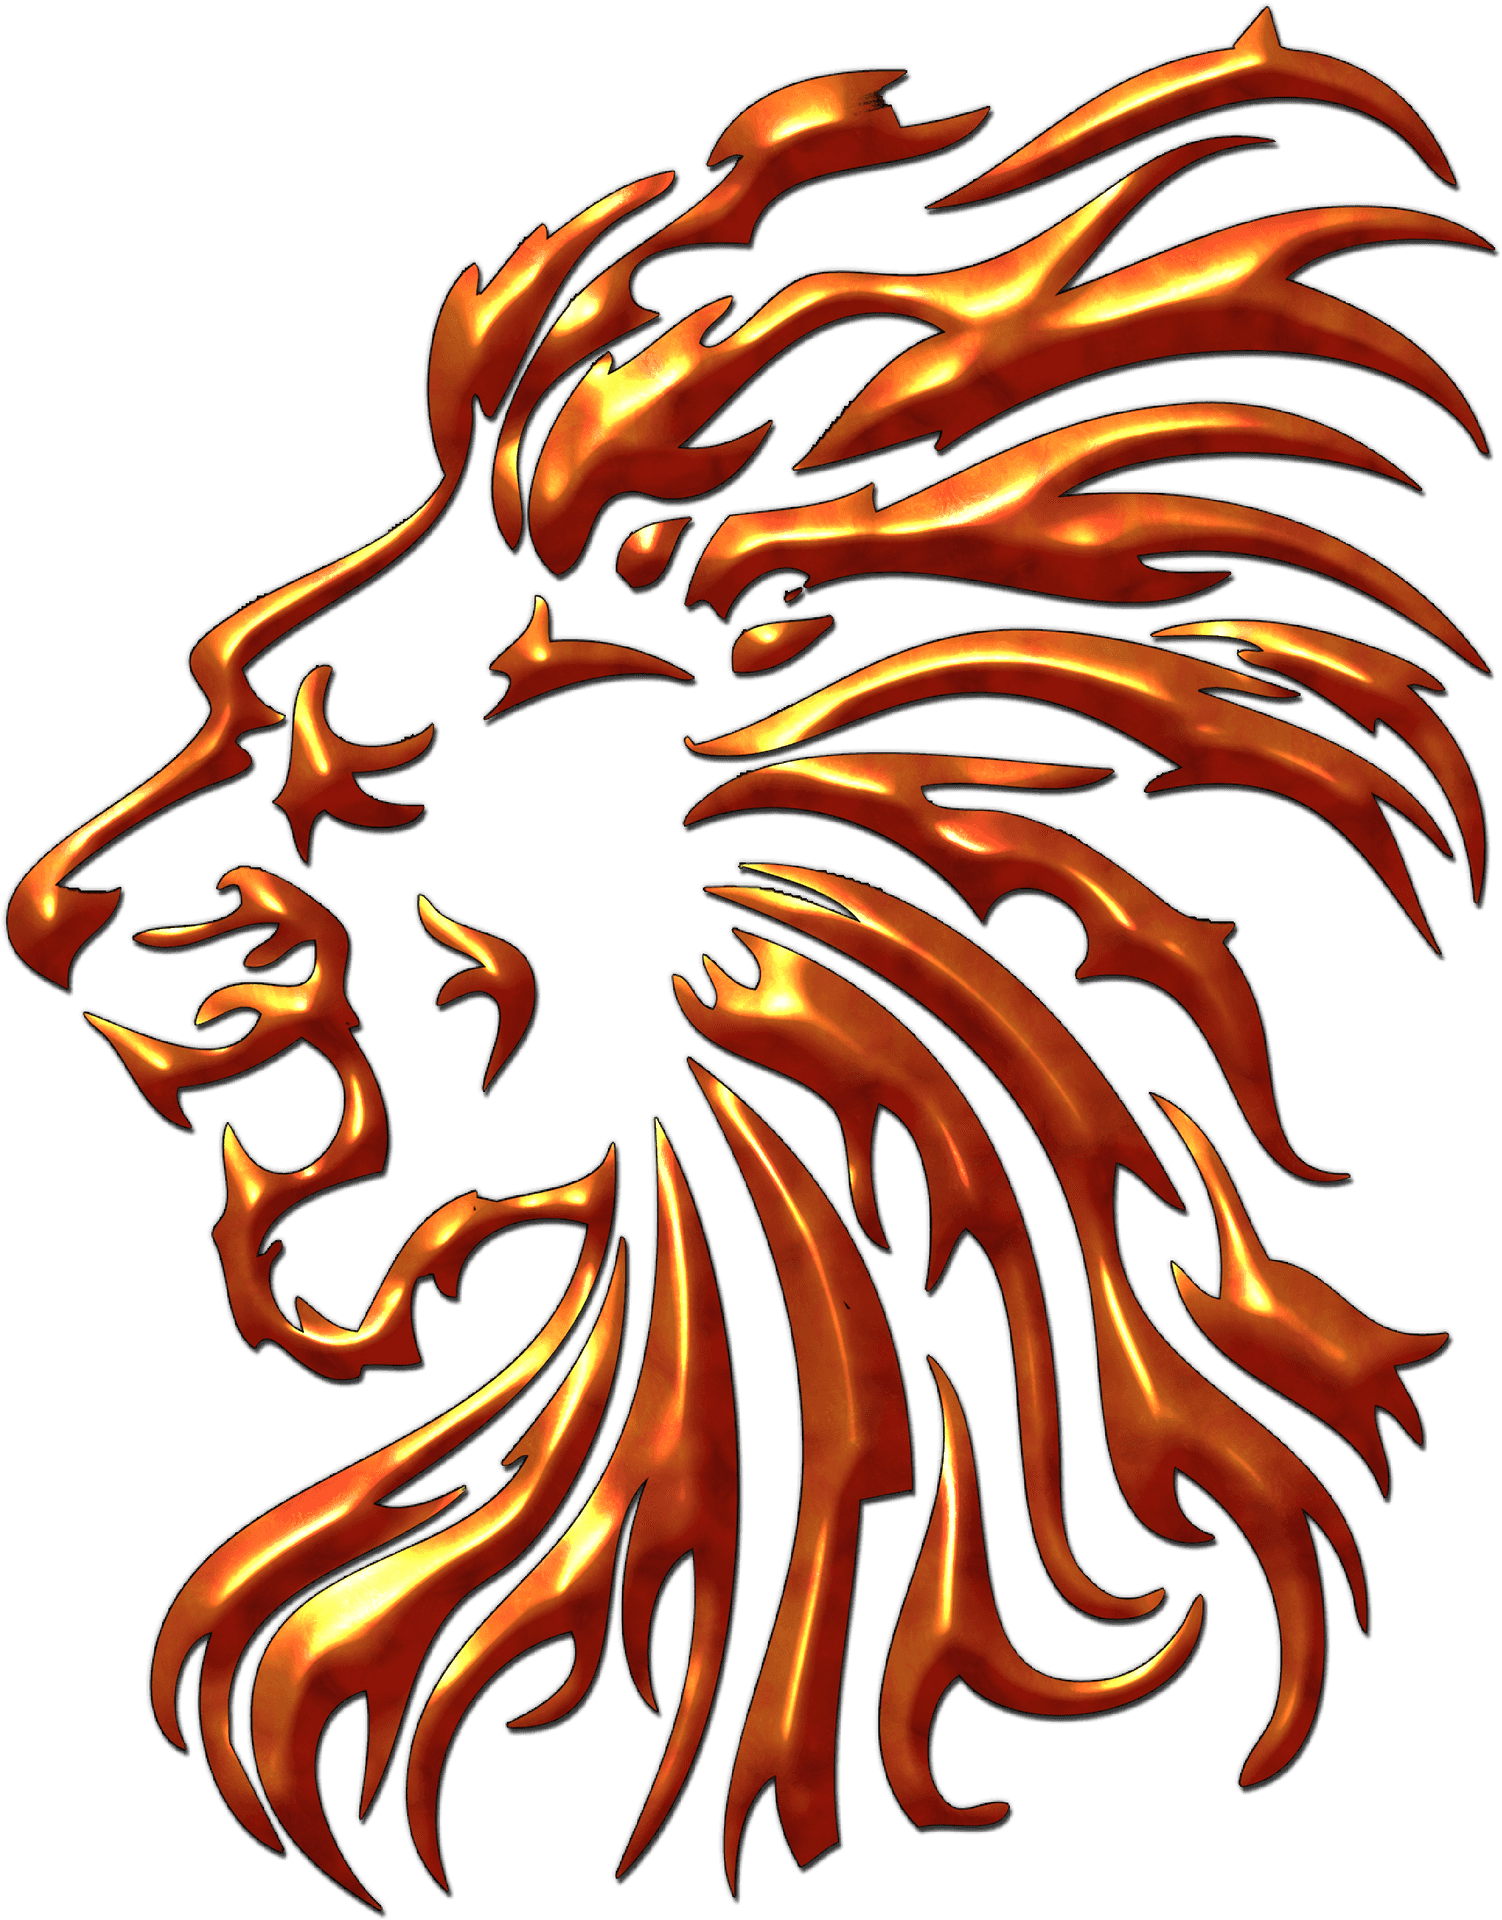 Flaming Lion Profile Tattoo Design PNG